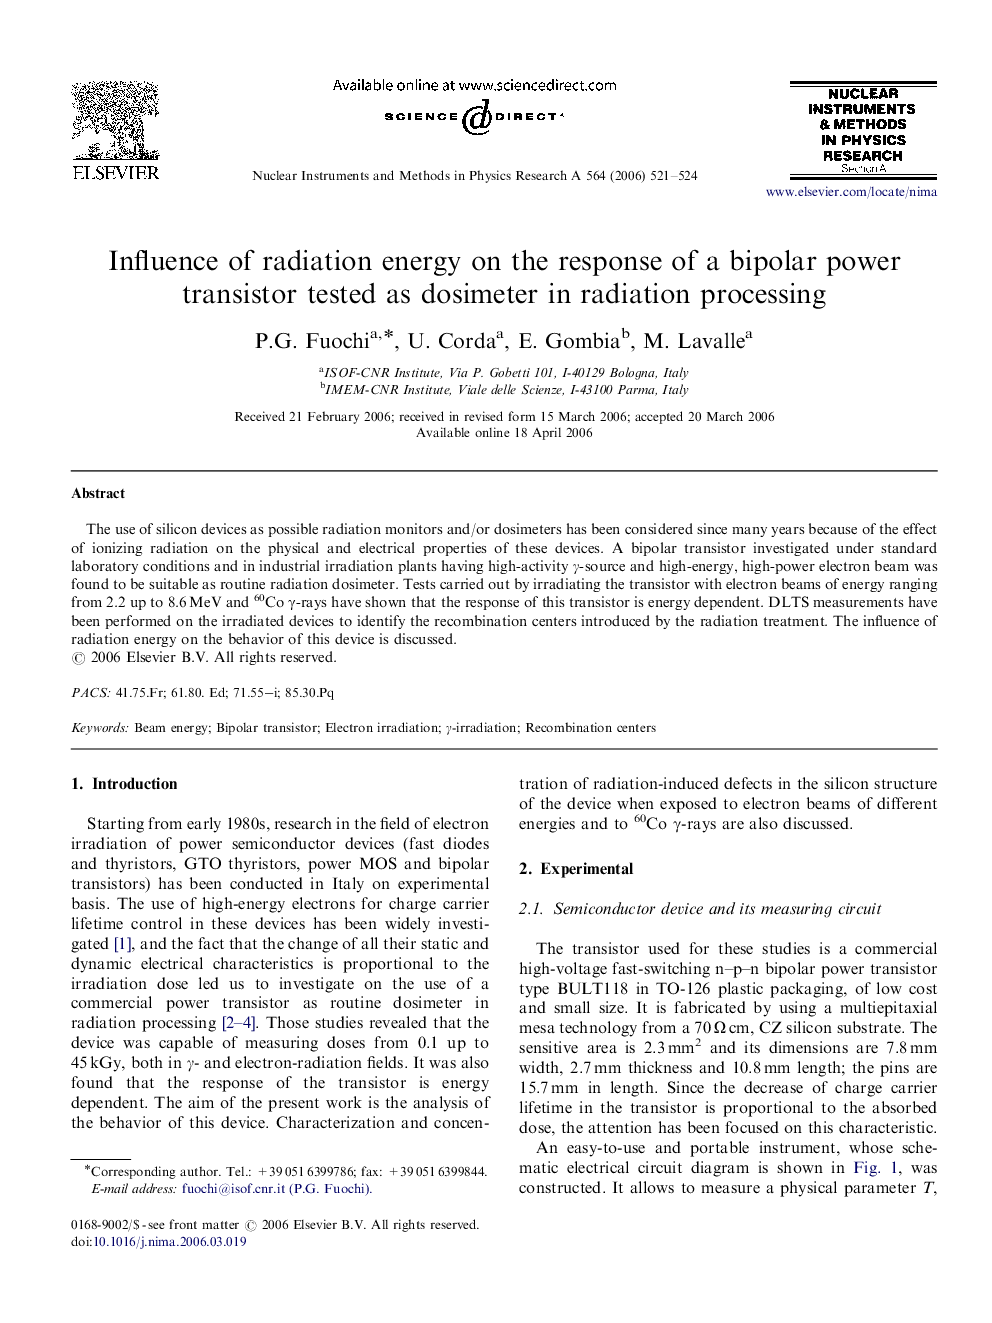 Influence of radiation energy on the response of a bipolar power transistor tested as dosimeter in radiation processing